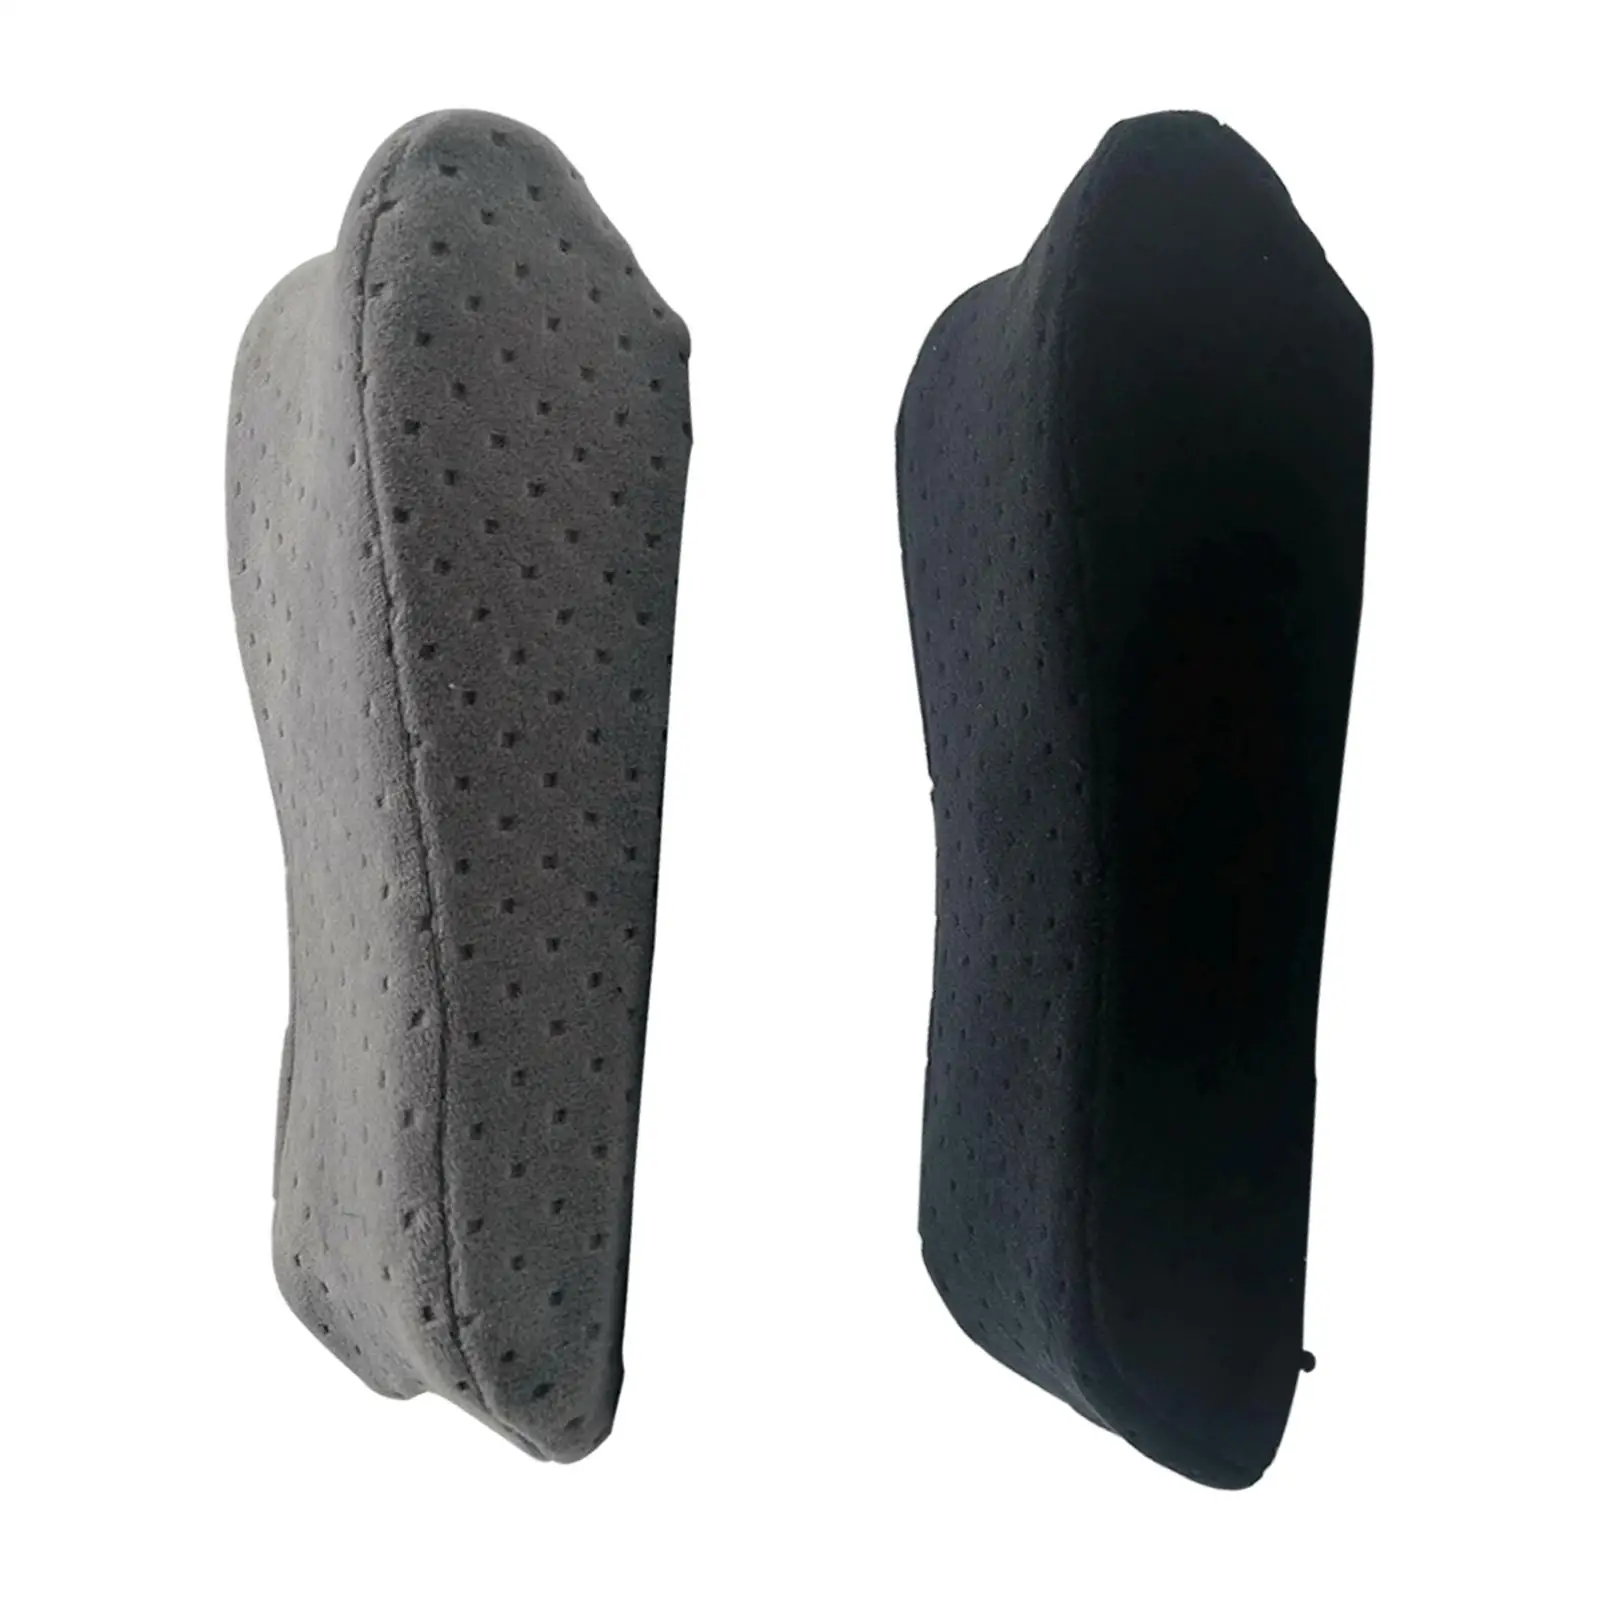 Armrest Pads Comfy Washable Velvet Arm Rest Pillow Support Cushion for Chairs